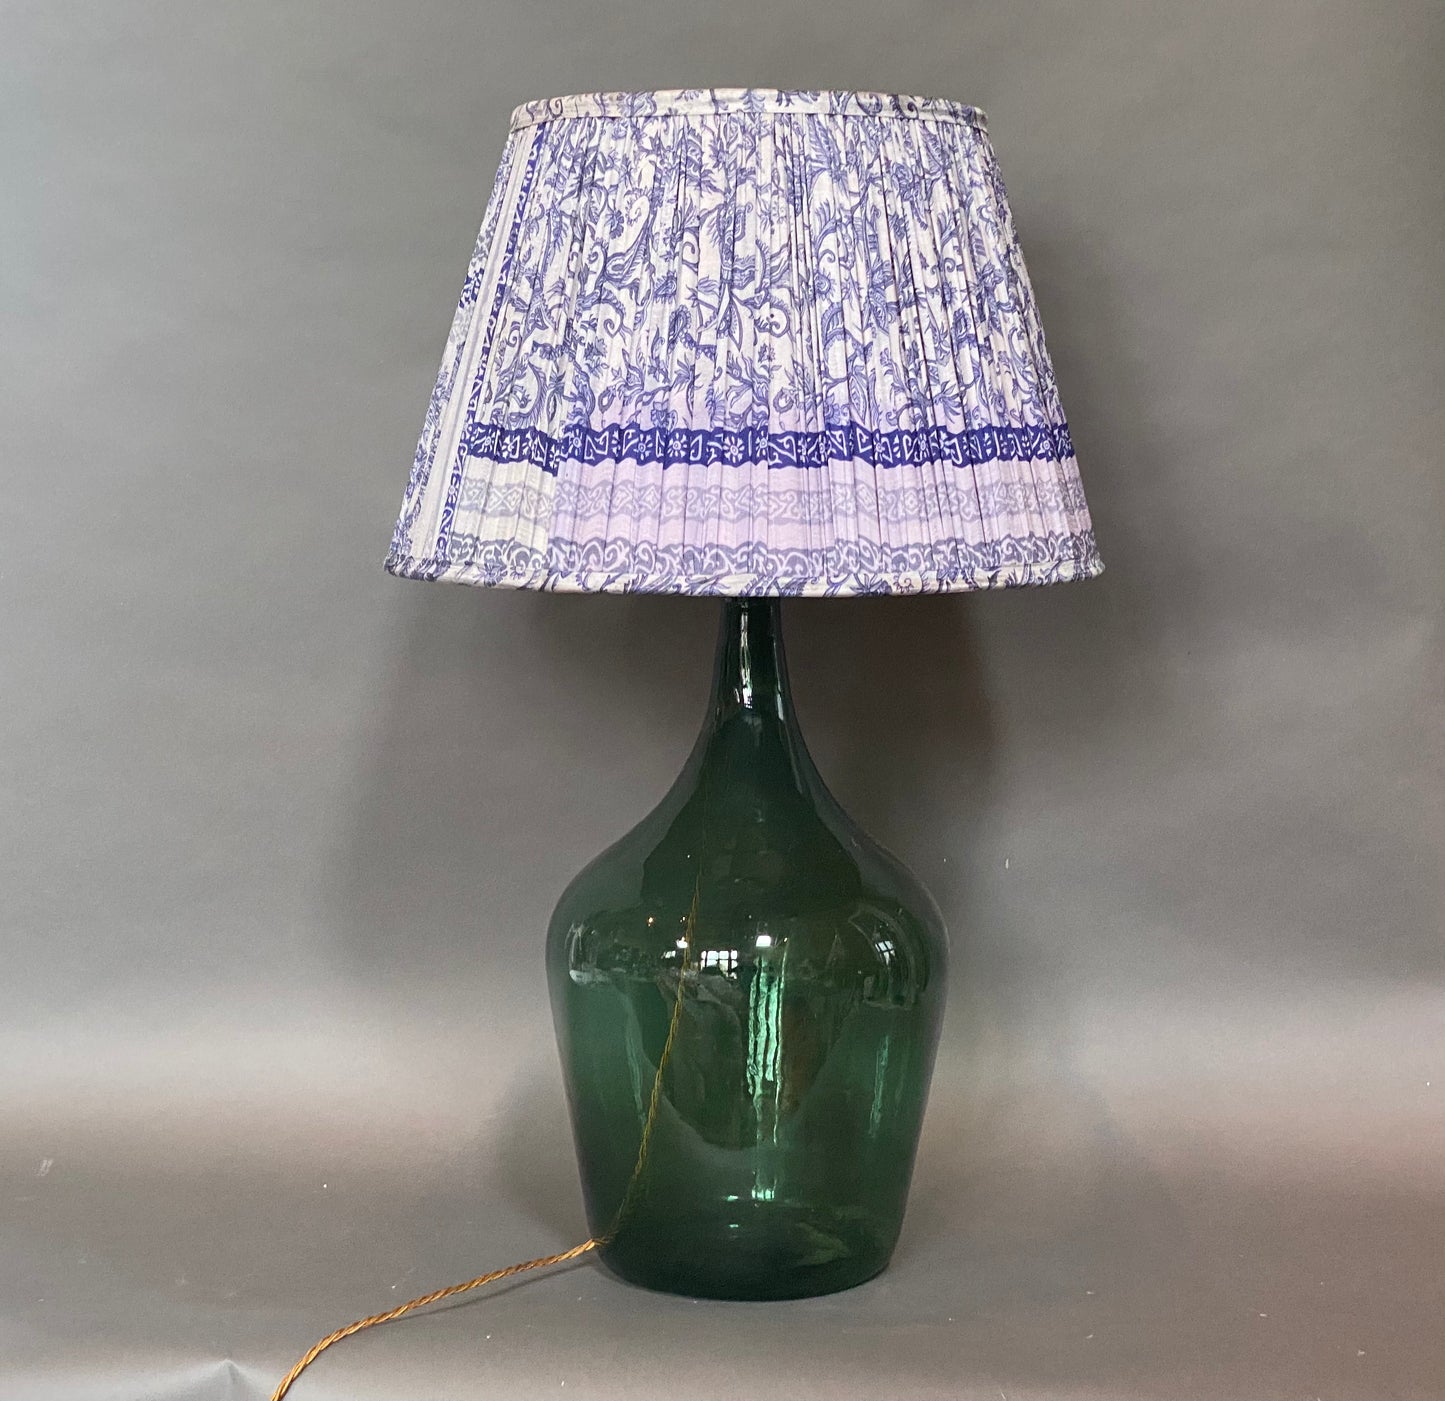 Royal Blue Paisley silk lampshade displayed on a green bottle lamp base on a grey background